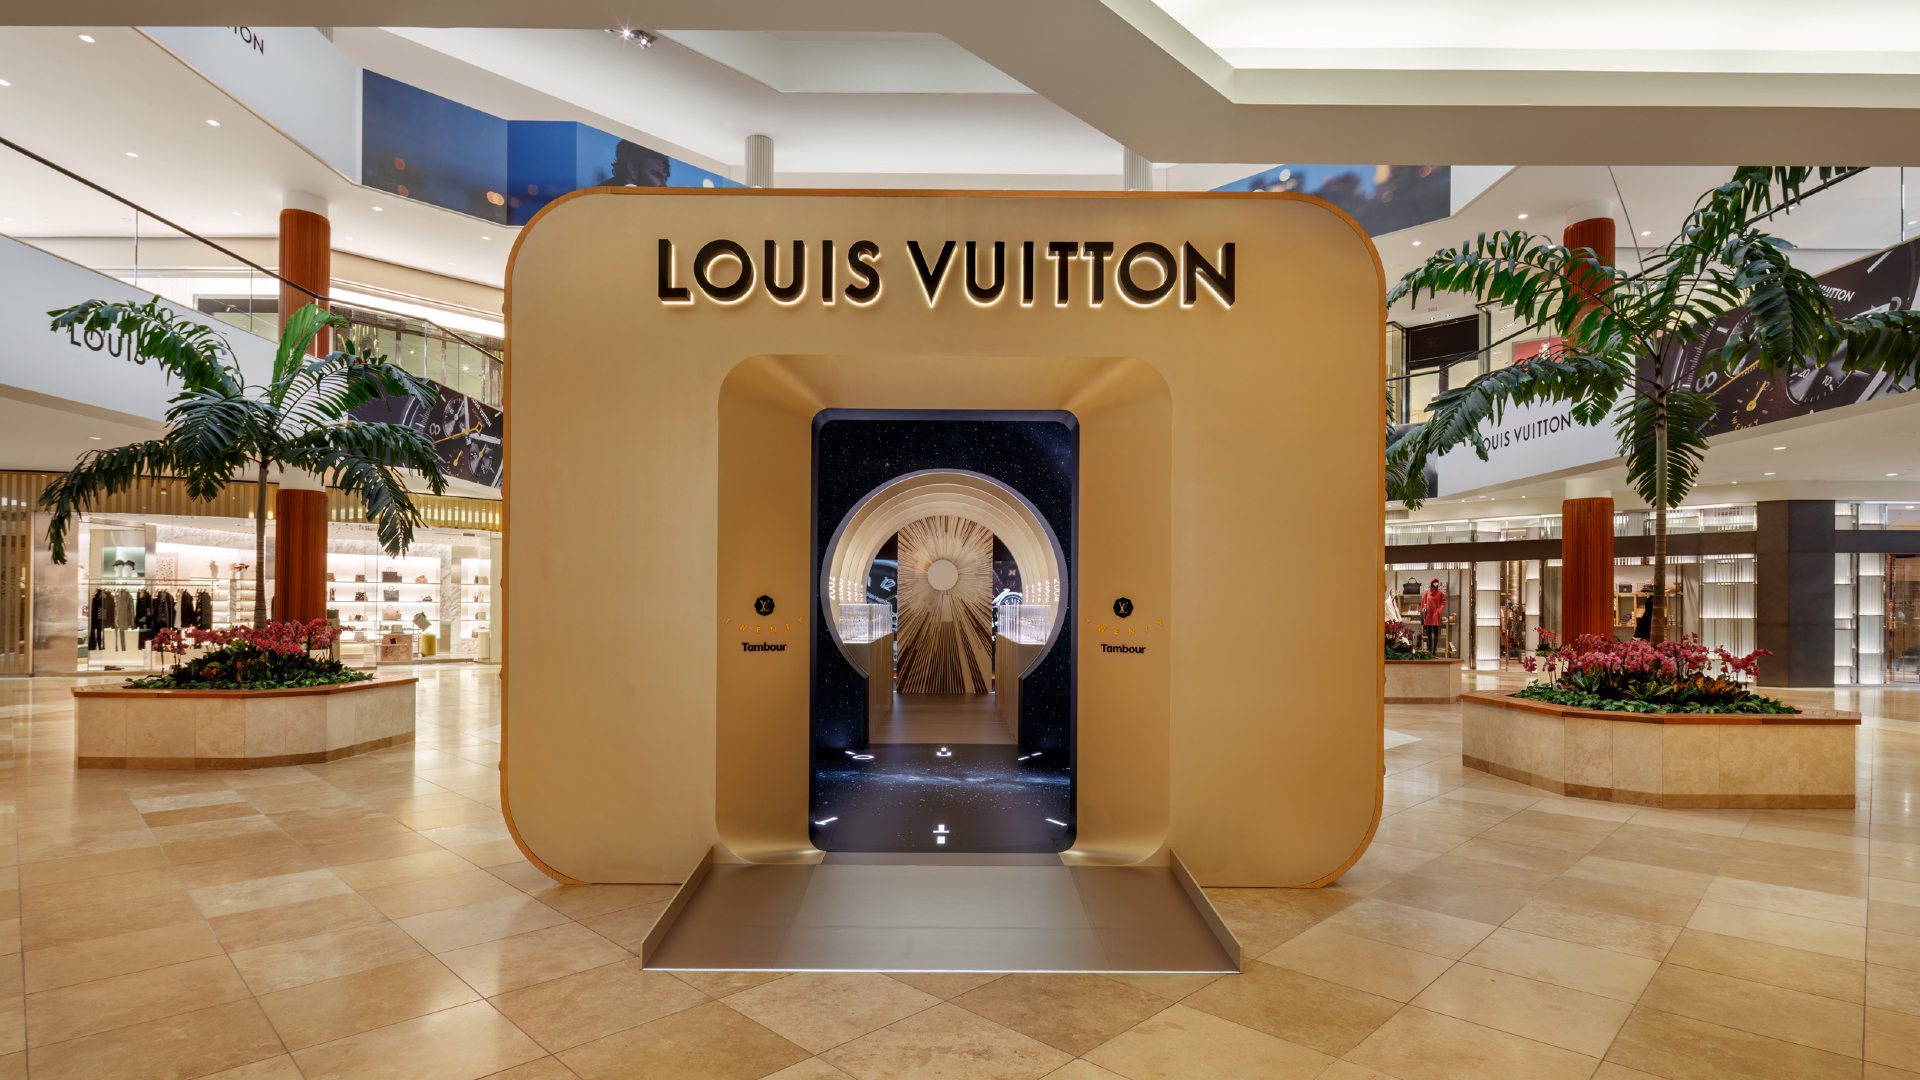 The Art of Selling: Louis Vuitton's Museum-Like Show Courts China Buyers